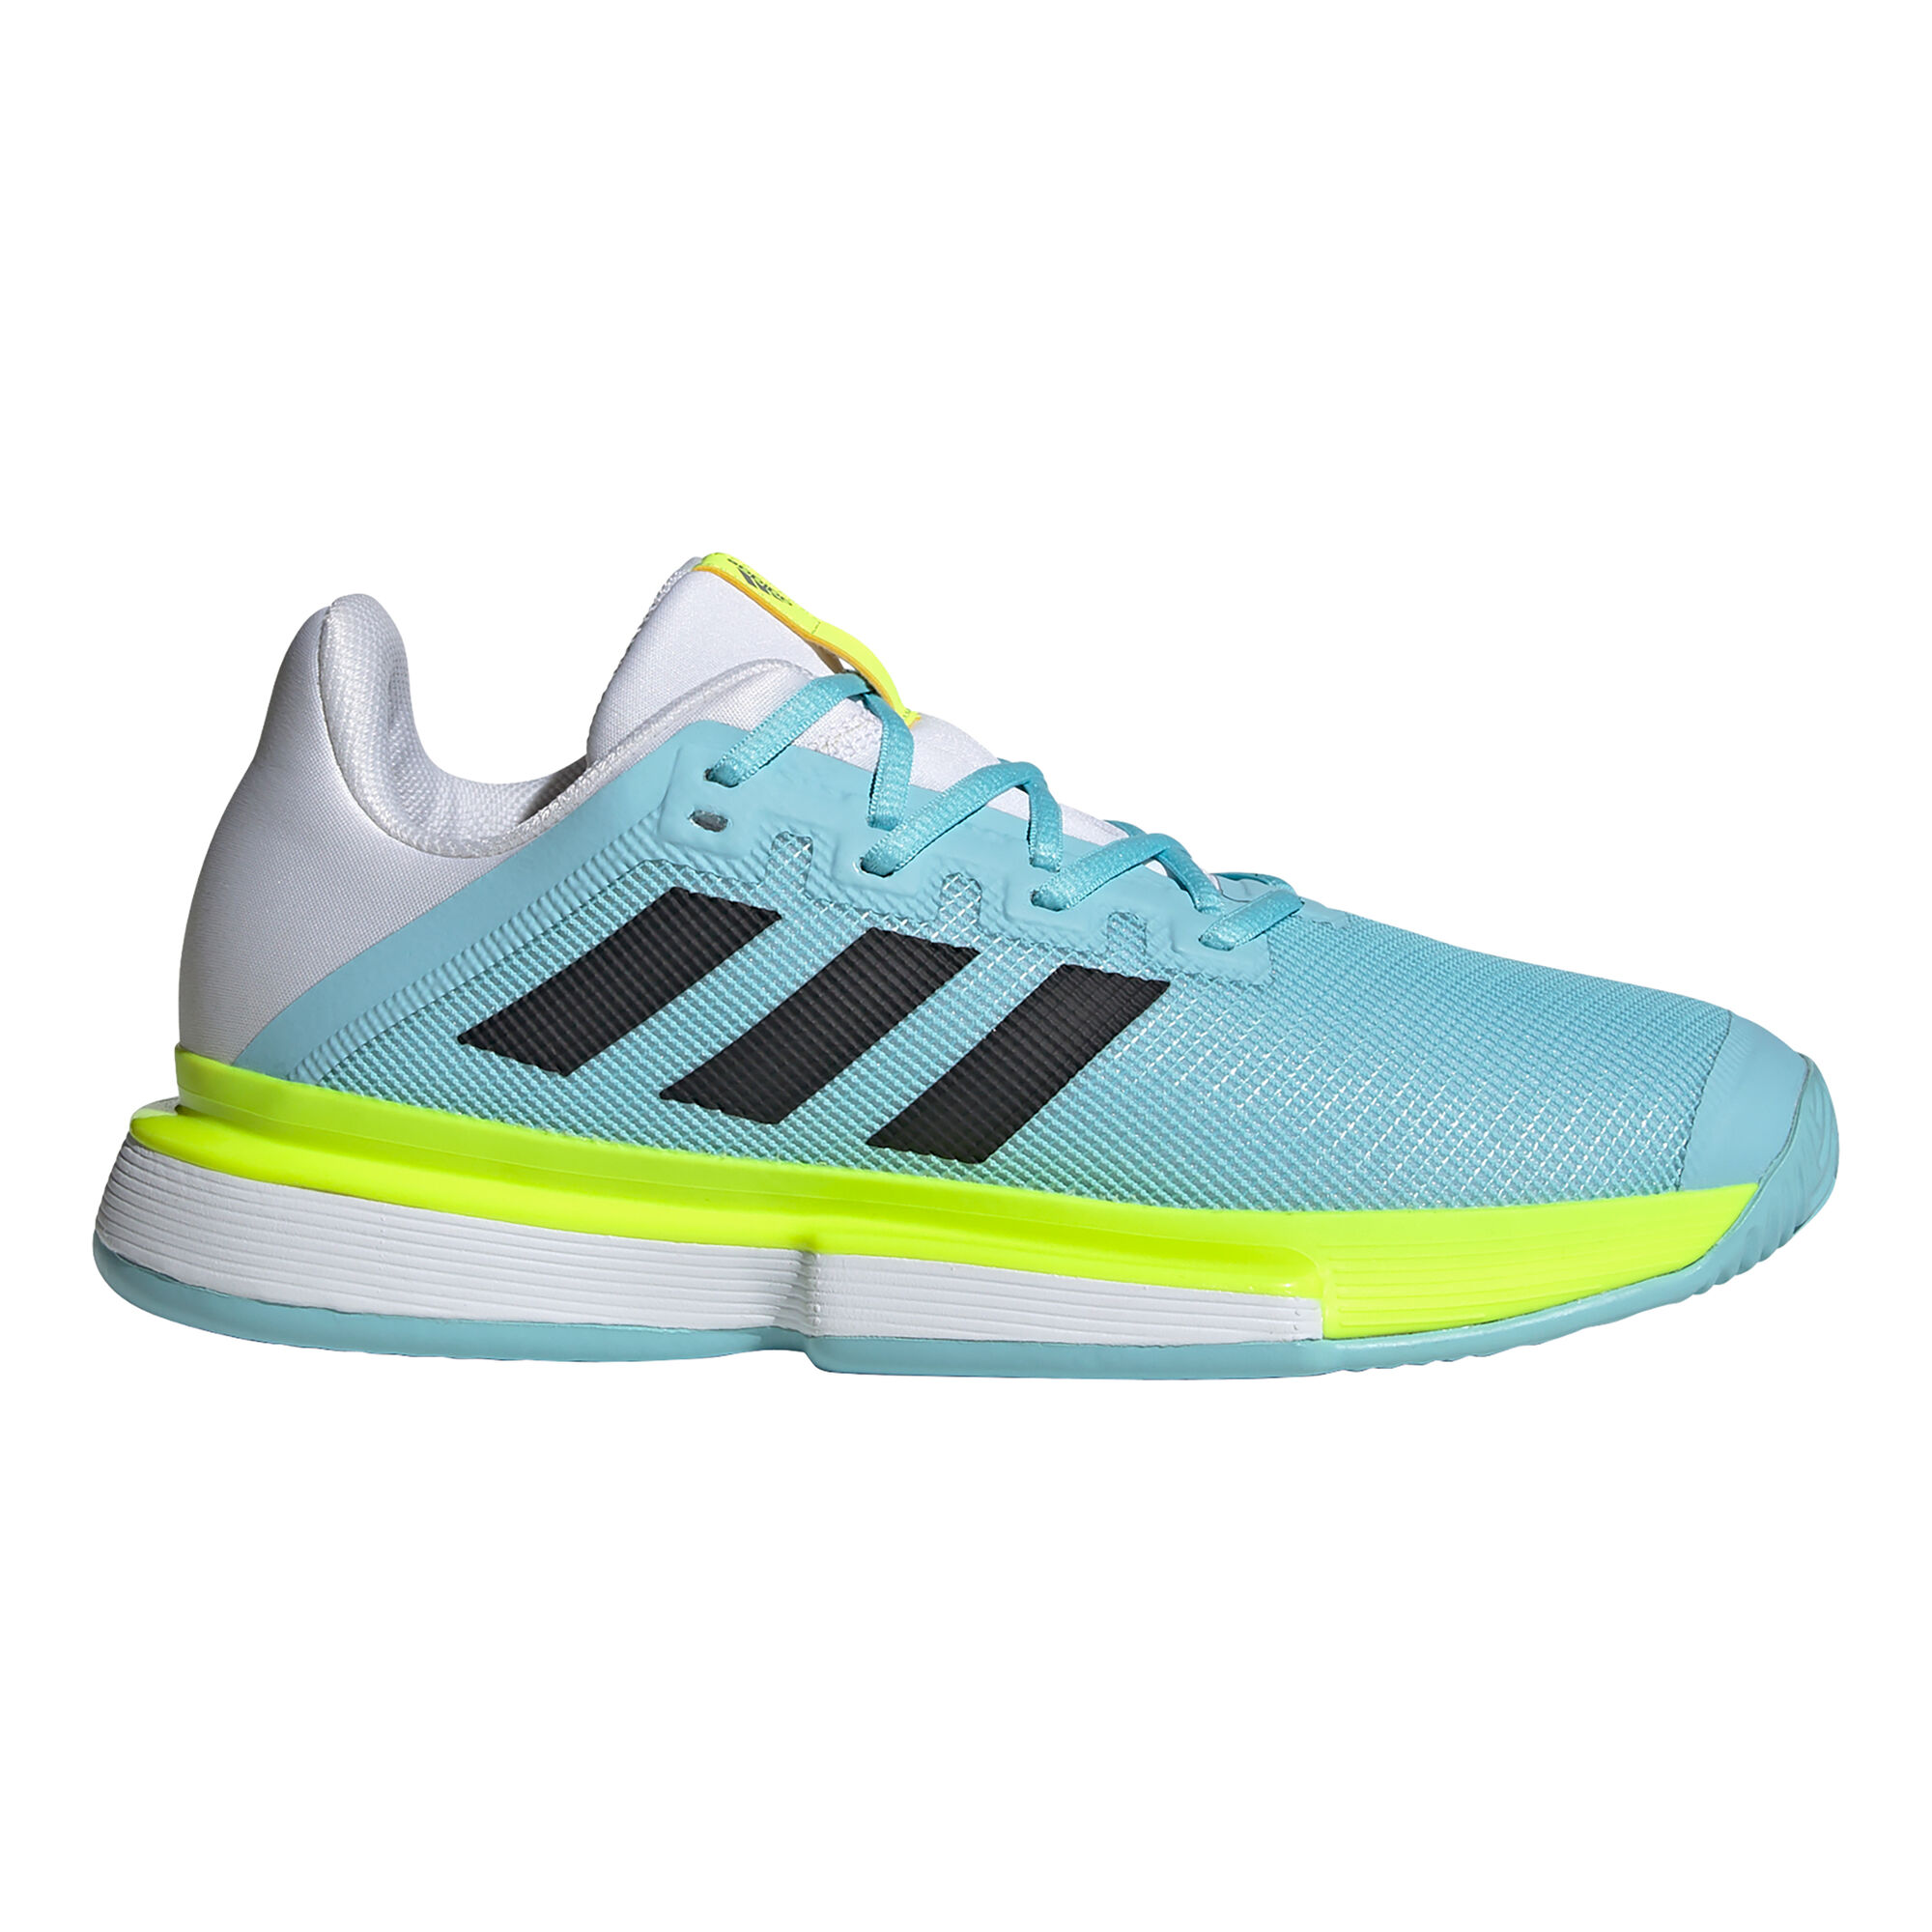 Buy adidas SoleMatch Bounce All Court Shoe Men Light Blue, Neon Yellow ...